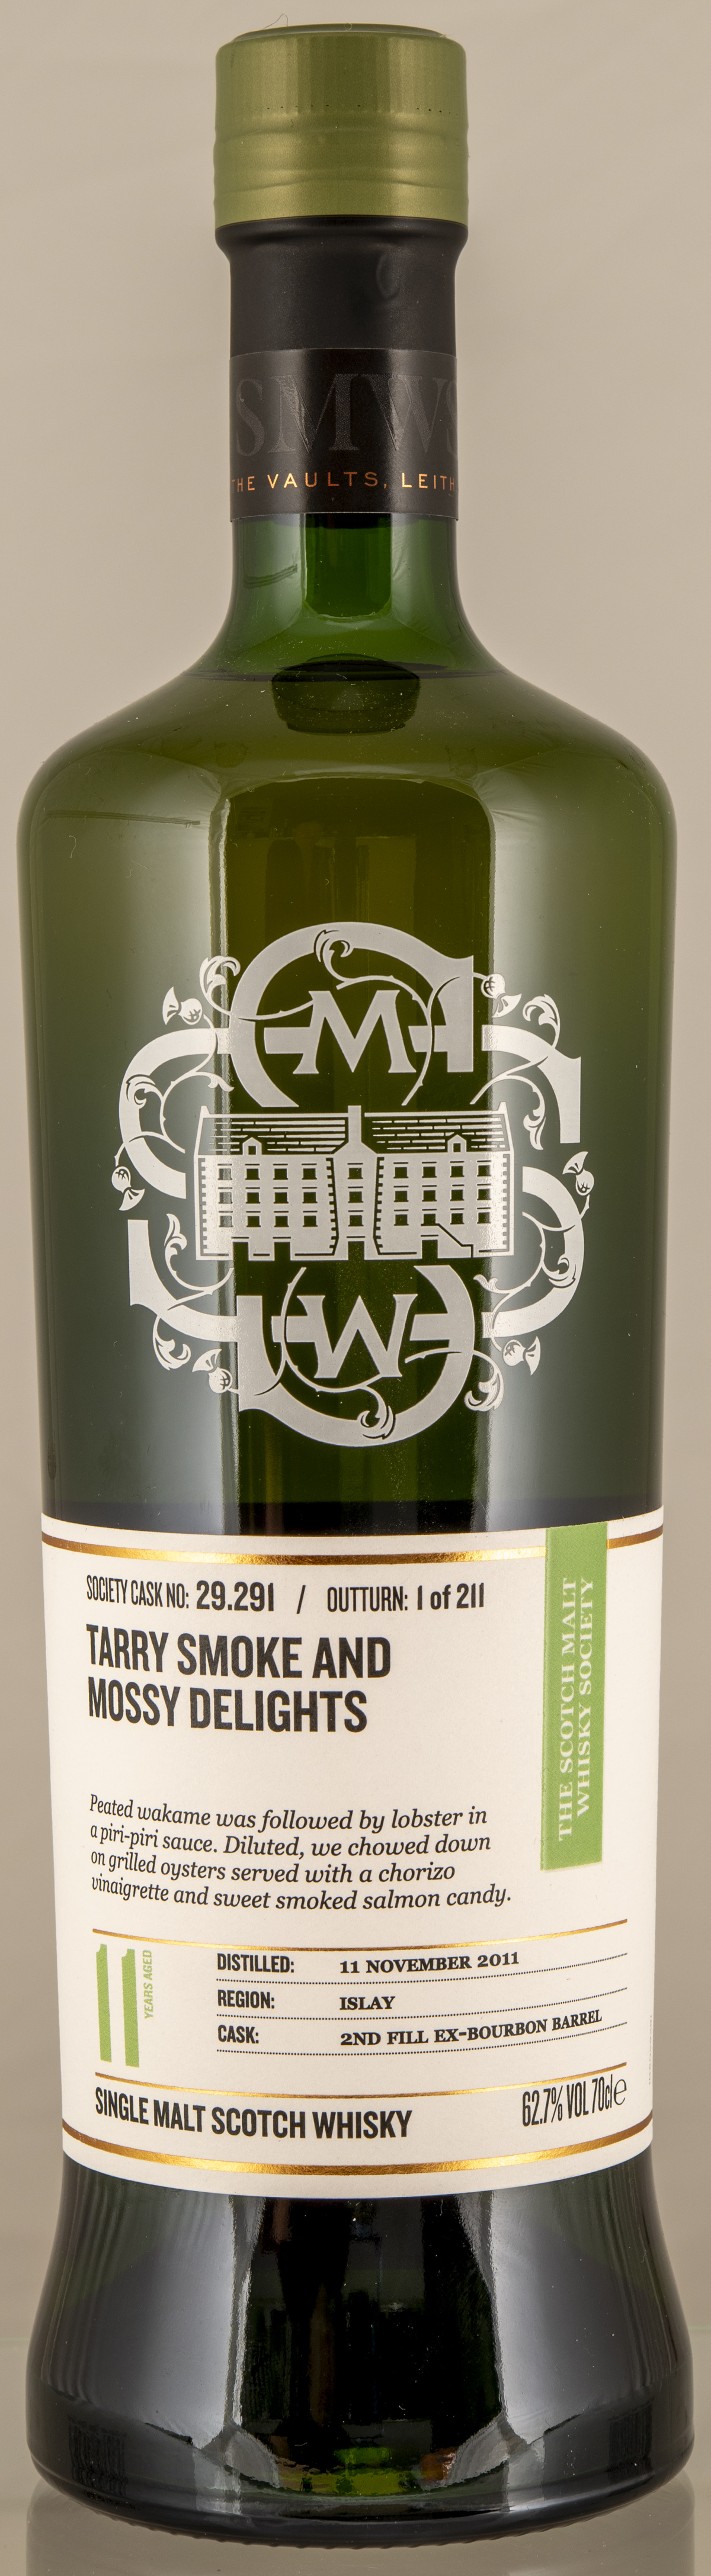 Billede: D85_8355 - SMWS 29.291 Tarry Smoke and Mossy Delights - bottle front.jpg